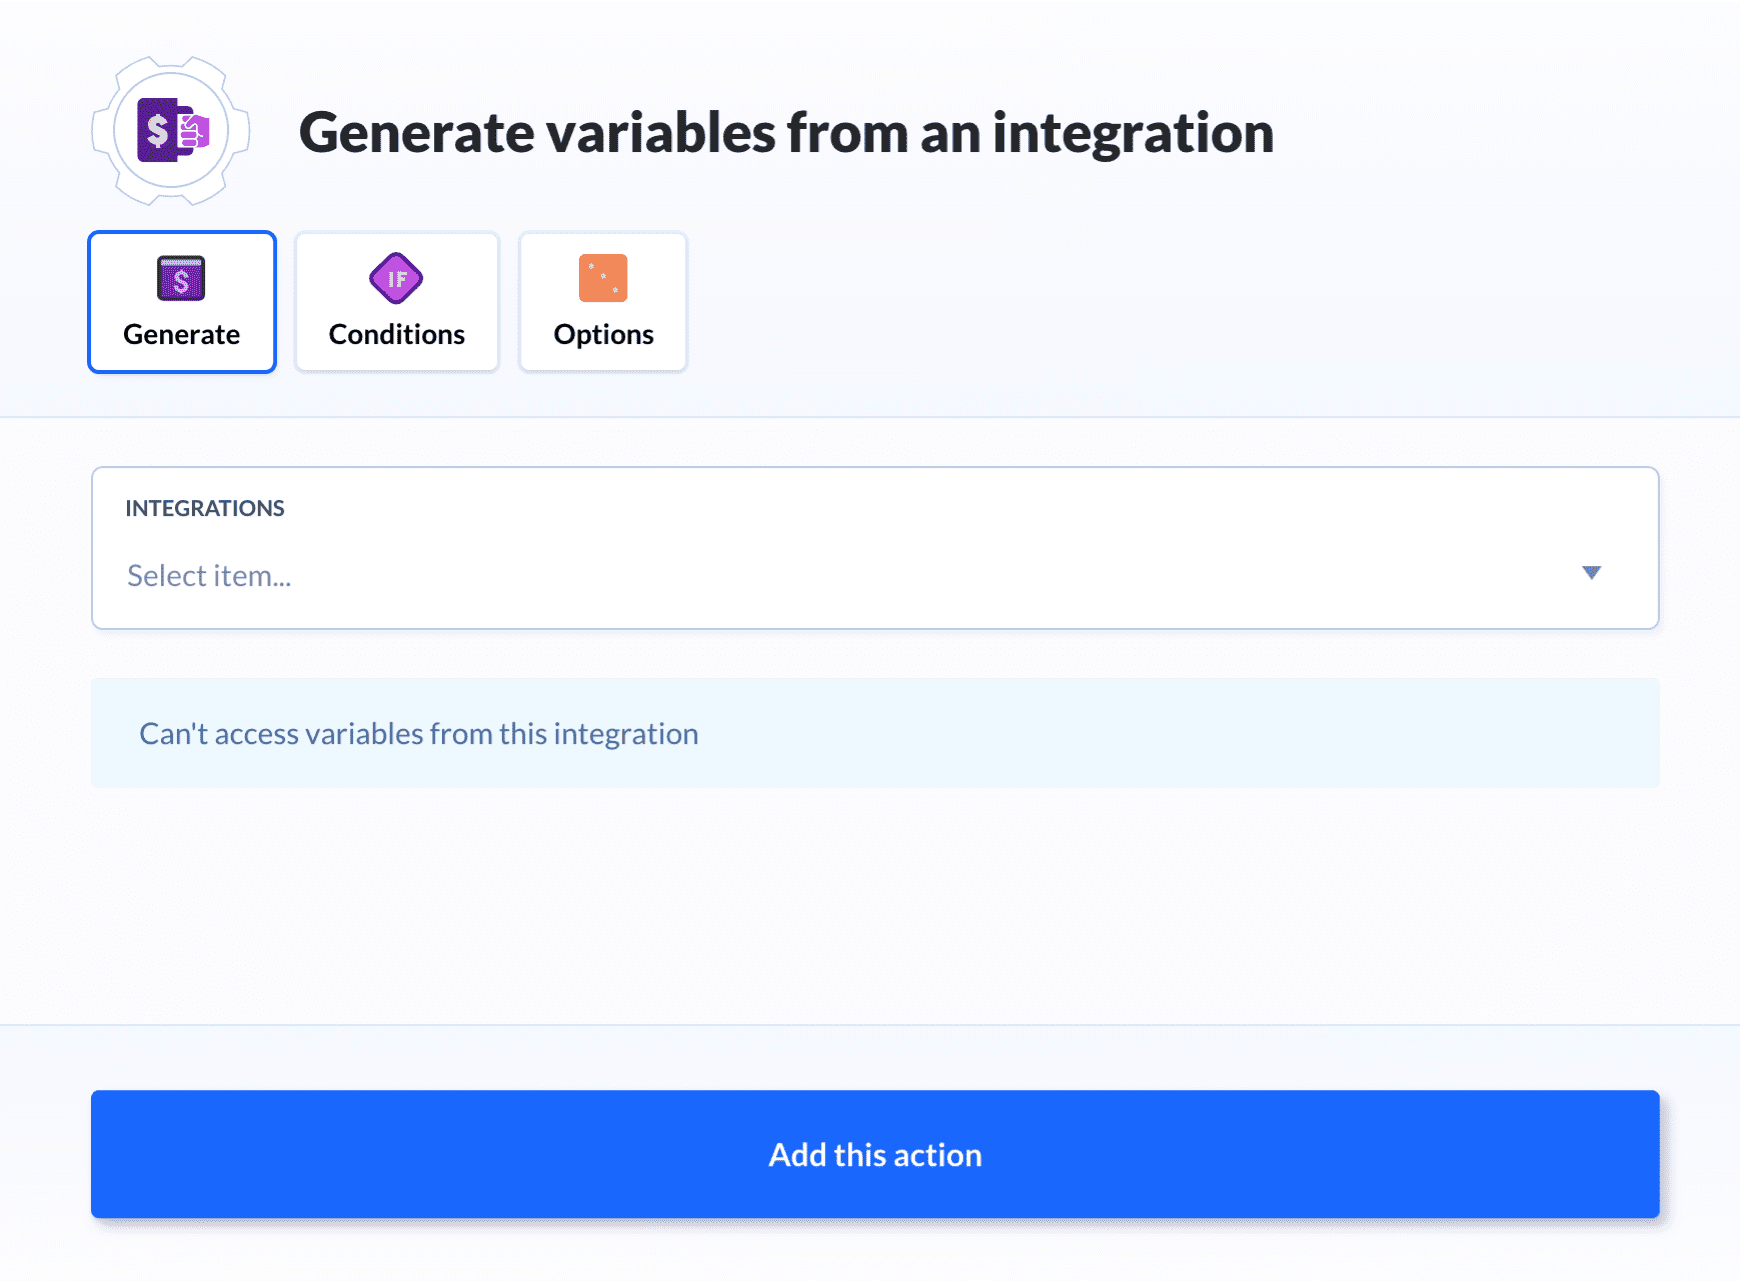 Preview Integration Vars action